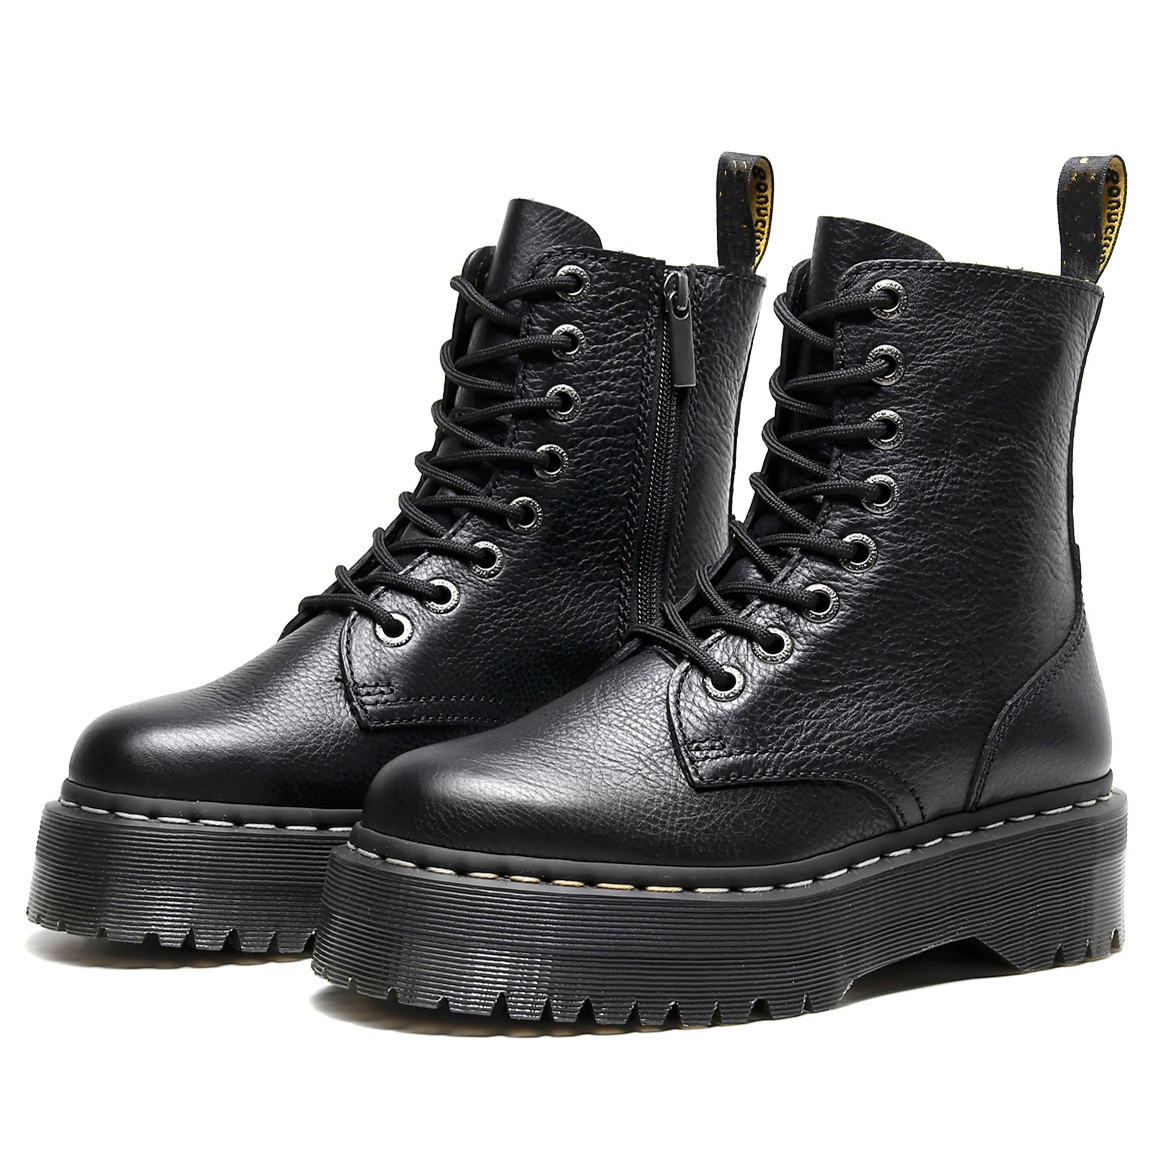 Martens Size34-44 Chunky Boots Motorcycle Boots for Women Autumn 2020 Fashion Round Toe Combat Boots Ladies Shoes